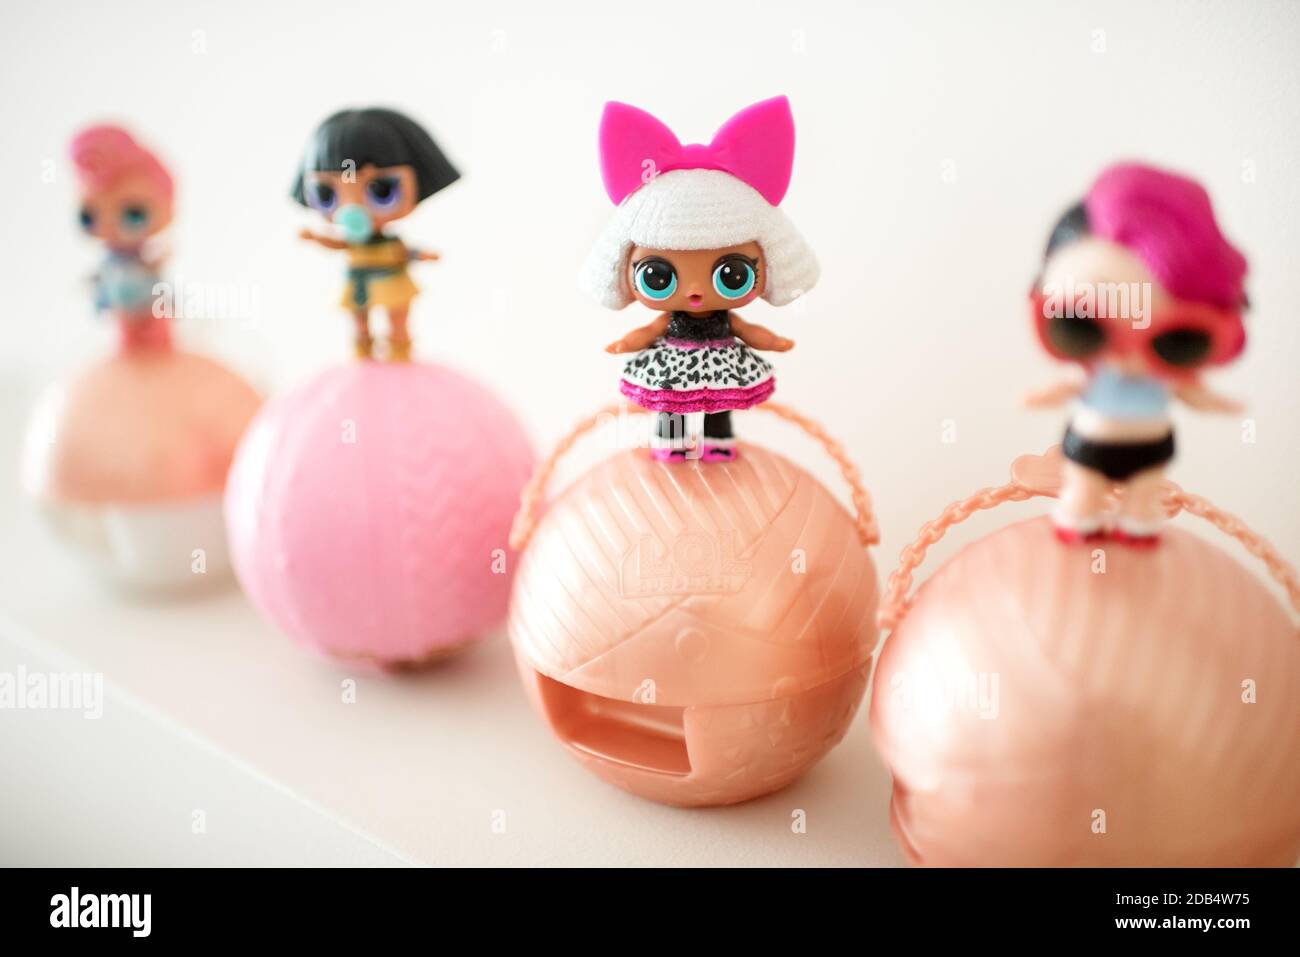 Row of cute different little L.O.L. baby dolls standing on top of their ball packaging showing different fashion accessories arranged in a diagonal ro Stock Photo